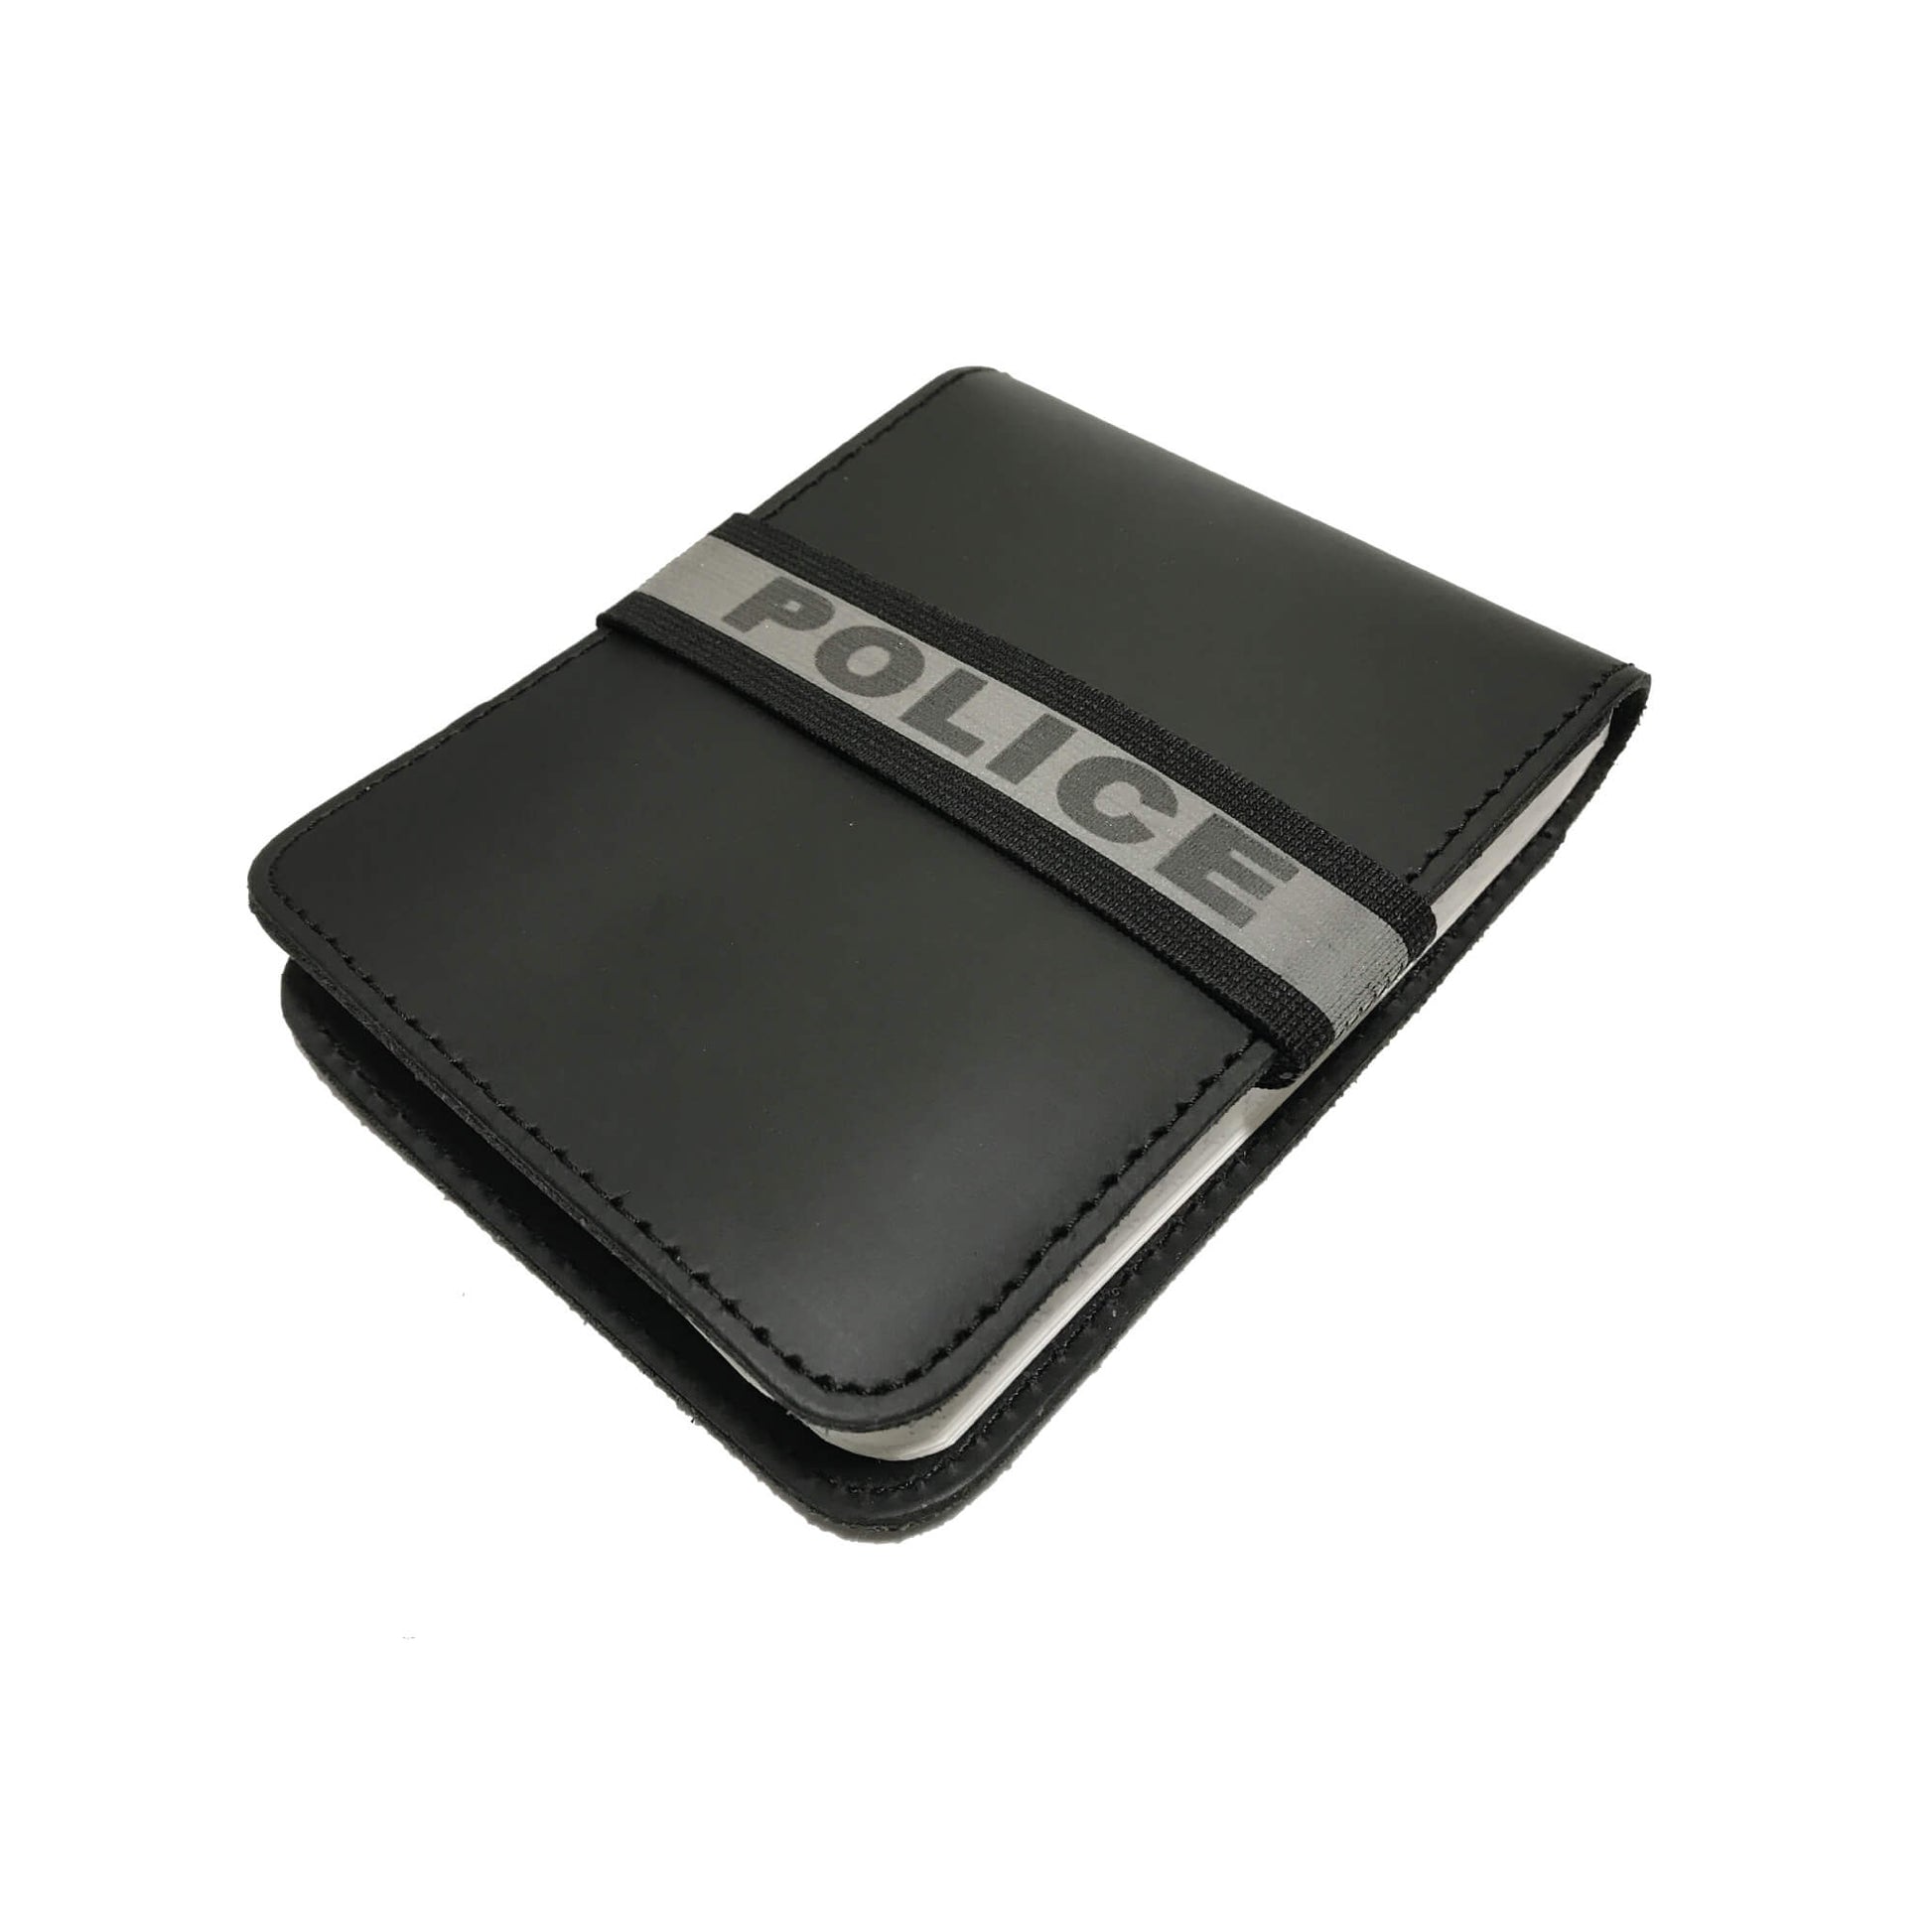 Calgary Community Standards Peace Officer Notebook Cover-Perfect Fit-911 Duty Gear Canada